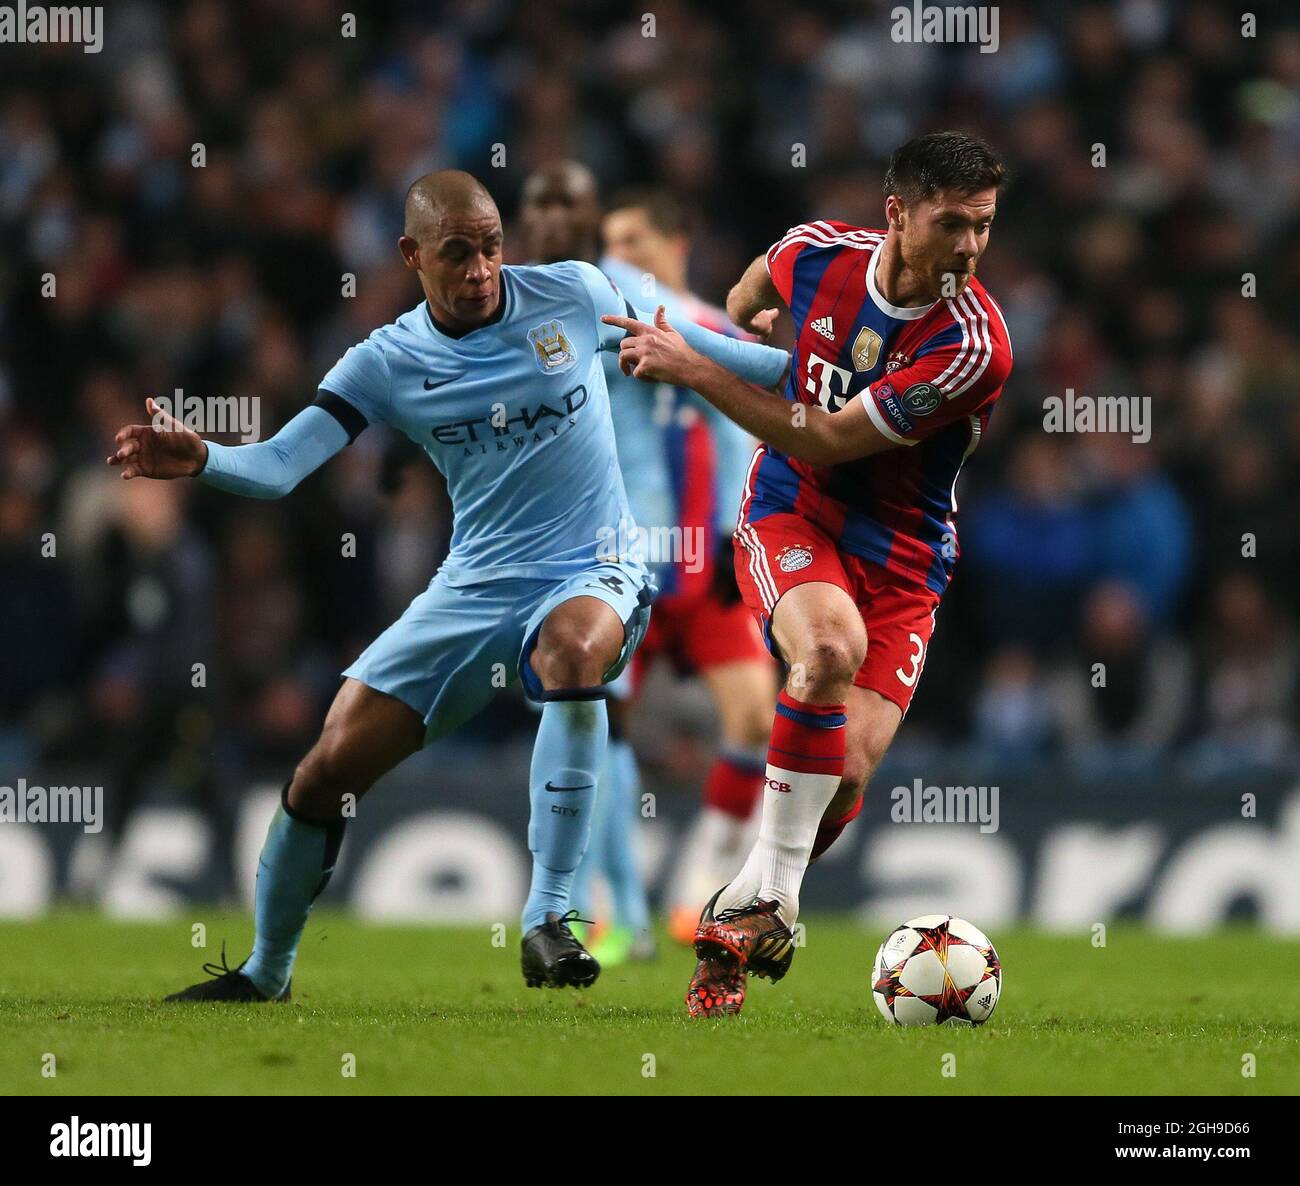 Fernando of Manchester City and Xabi Alonso of Bayern Munich tackles during the Champions League Group E match between Manchester City and Bayern Munich held at Etihad Stadium in England on Nov. 25, 2014. Stock Photo